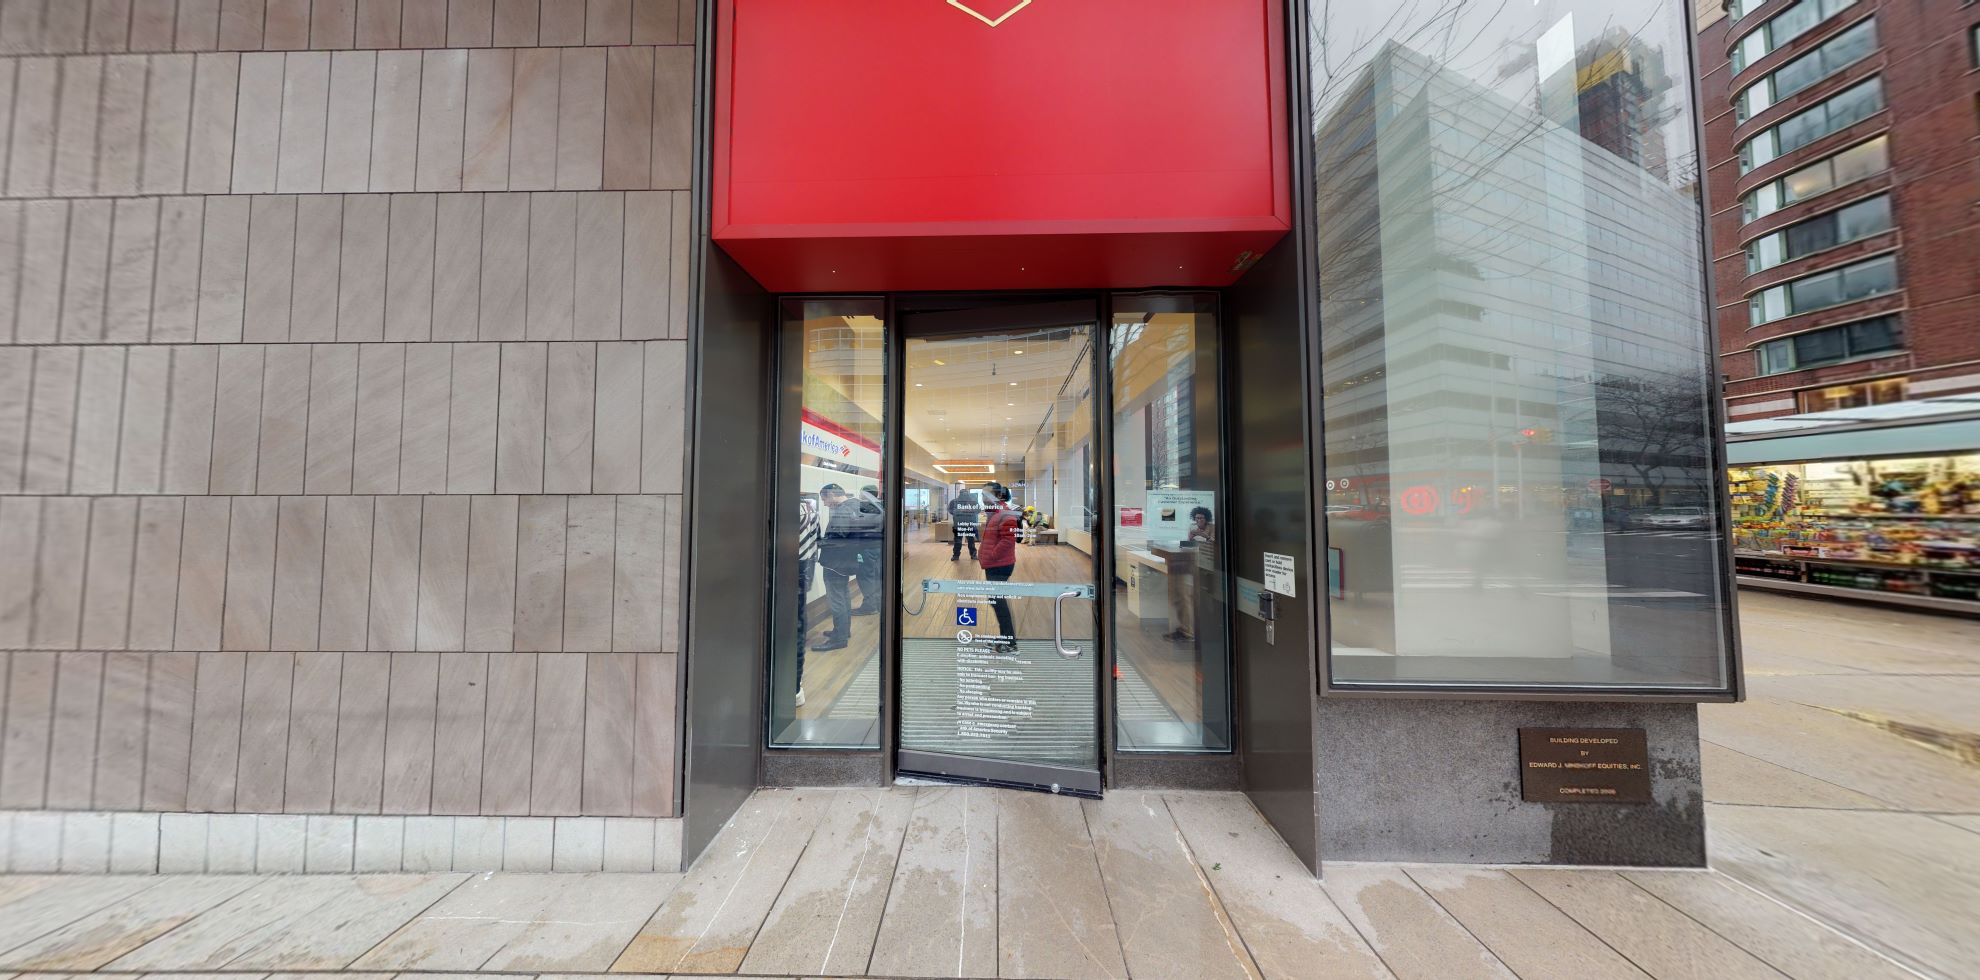 Bank of America financial center with walk-up ATM | 260 Greenwich St, New York, NY 10007